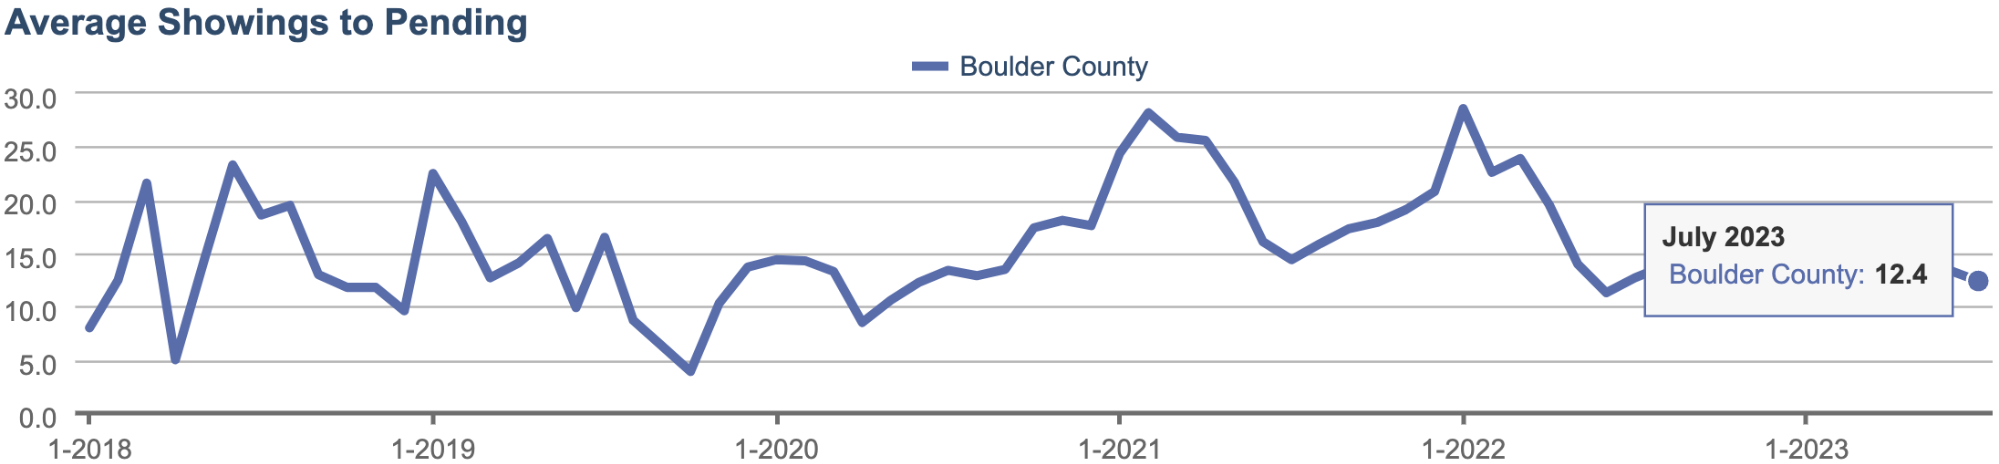 Average Showings Until Sold in Boulder County Since 2020